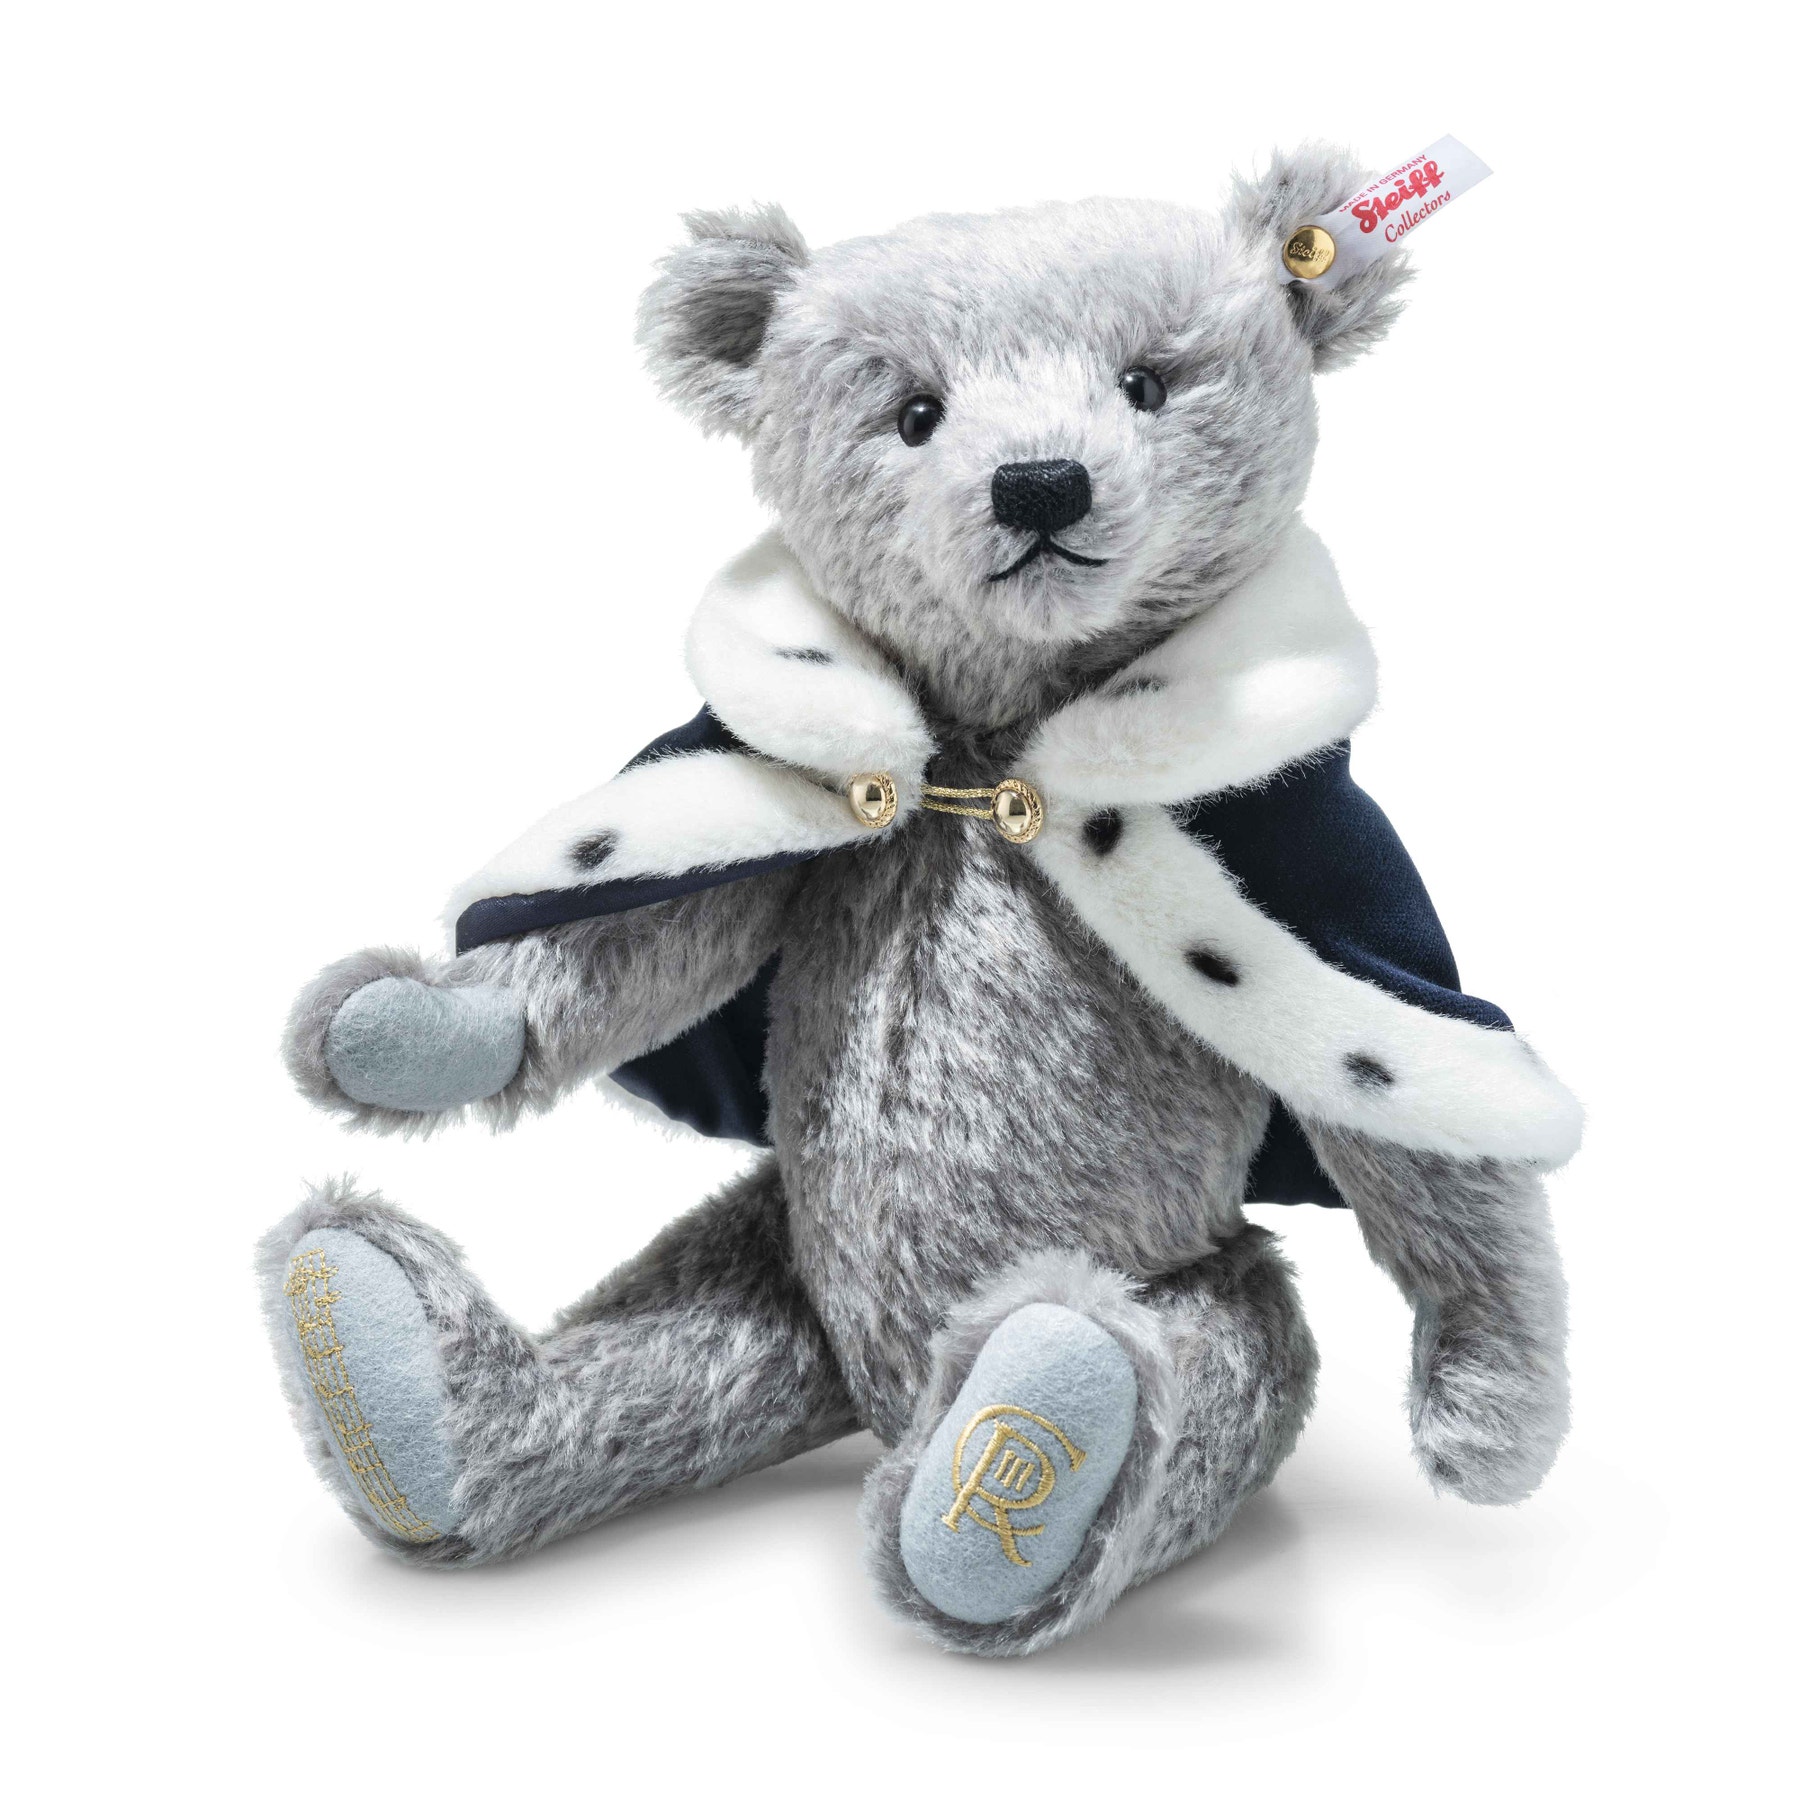 King Charles III “Long to Reign Over Us” Teddy Bear